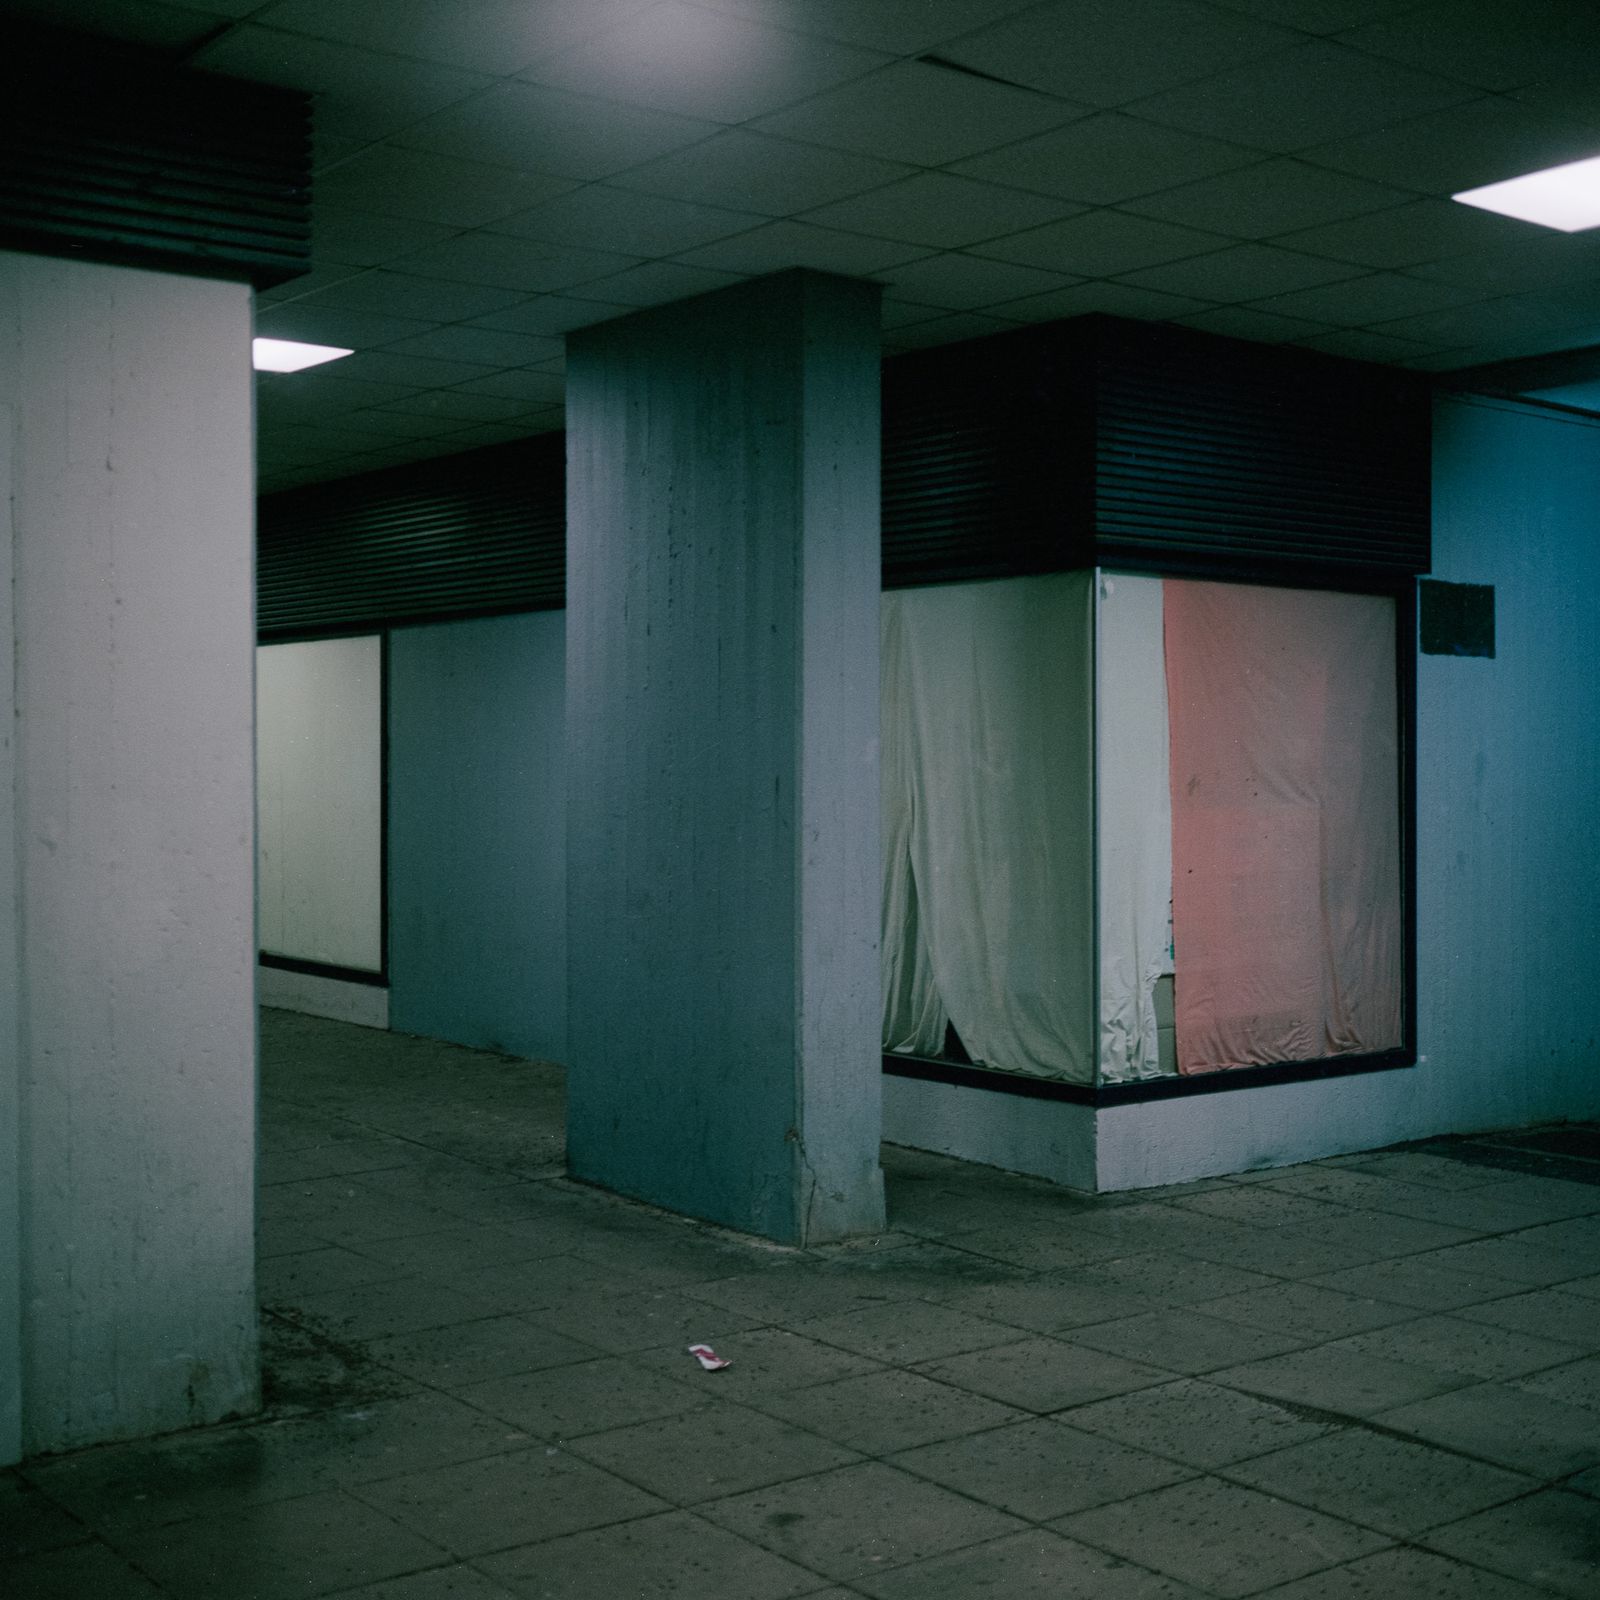 © Daniel Seiffert - Image from the TRABANTEN photography project